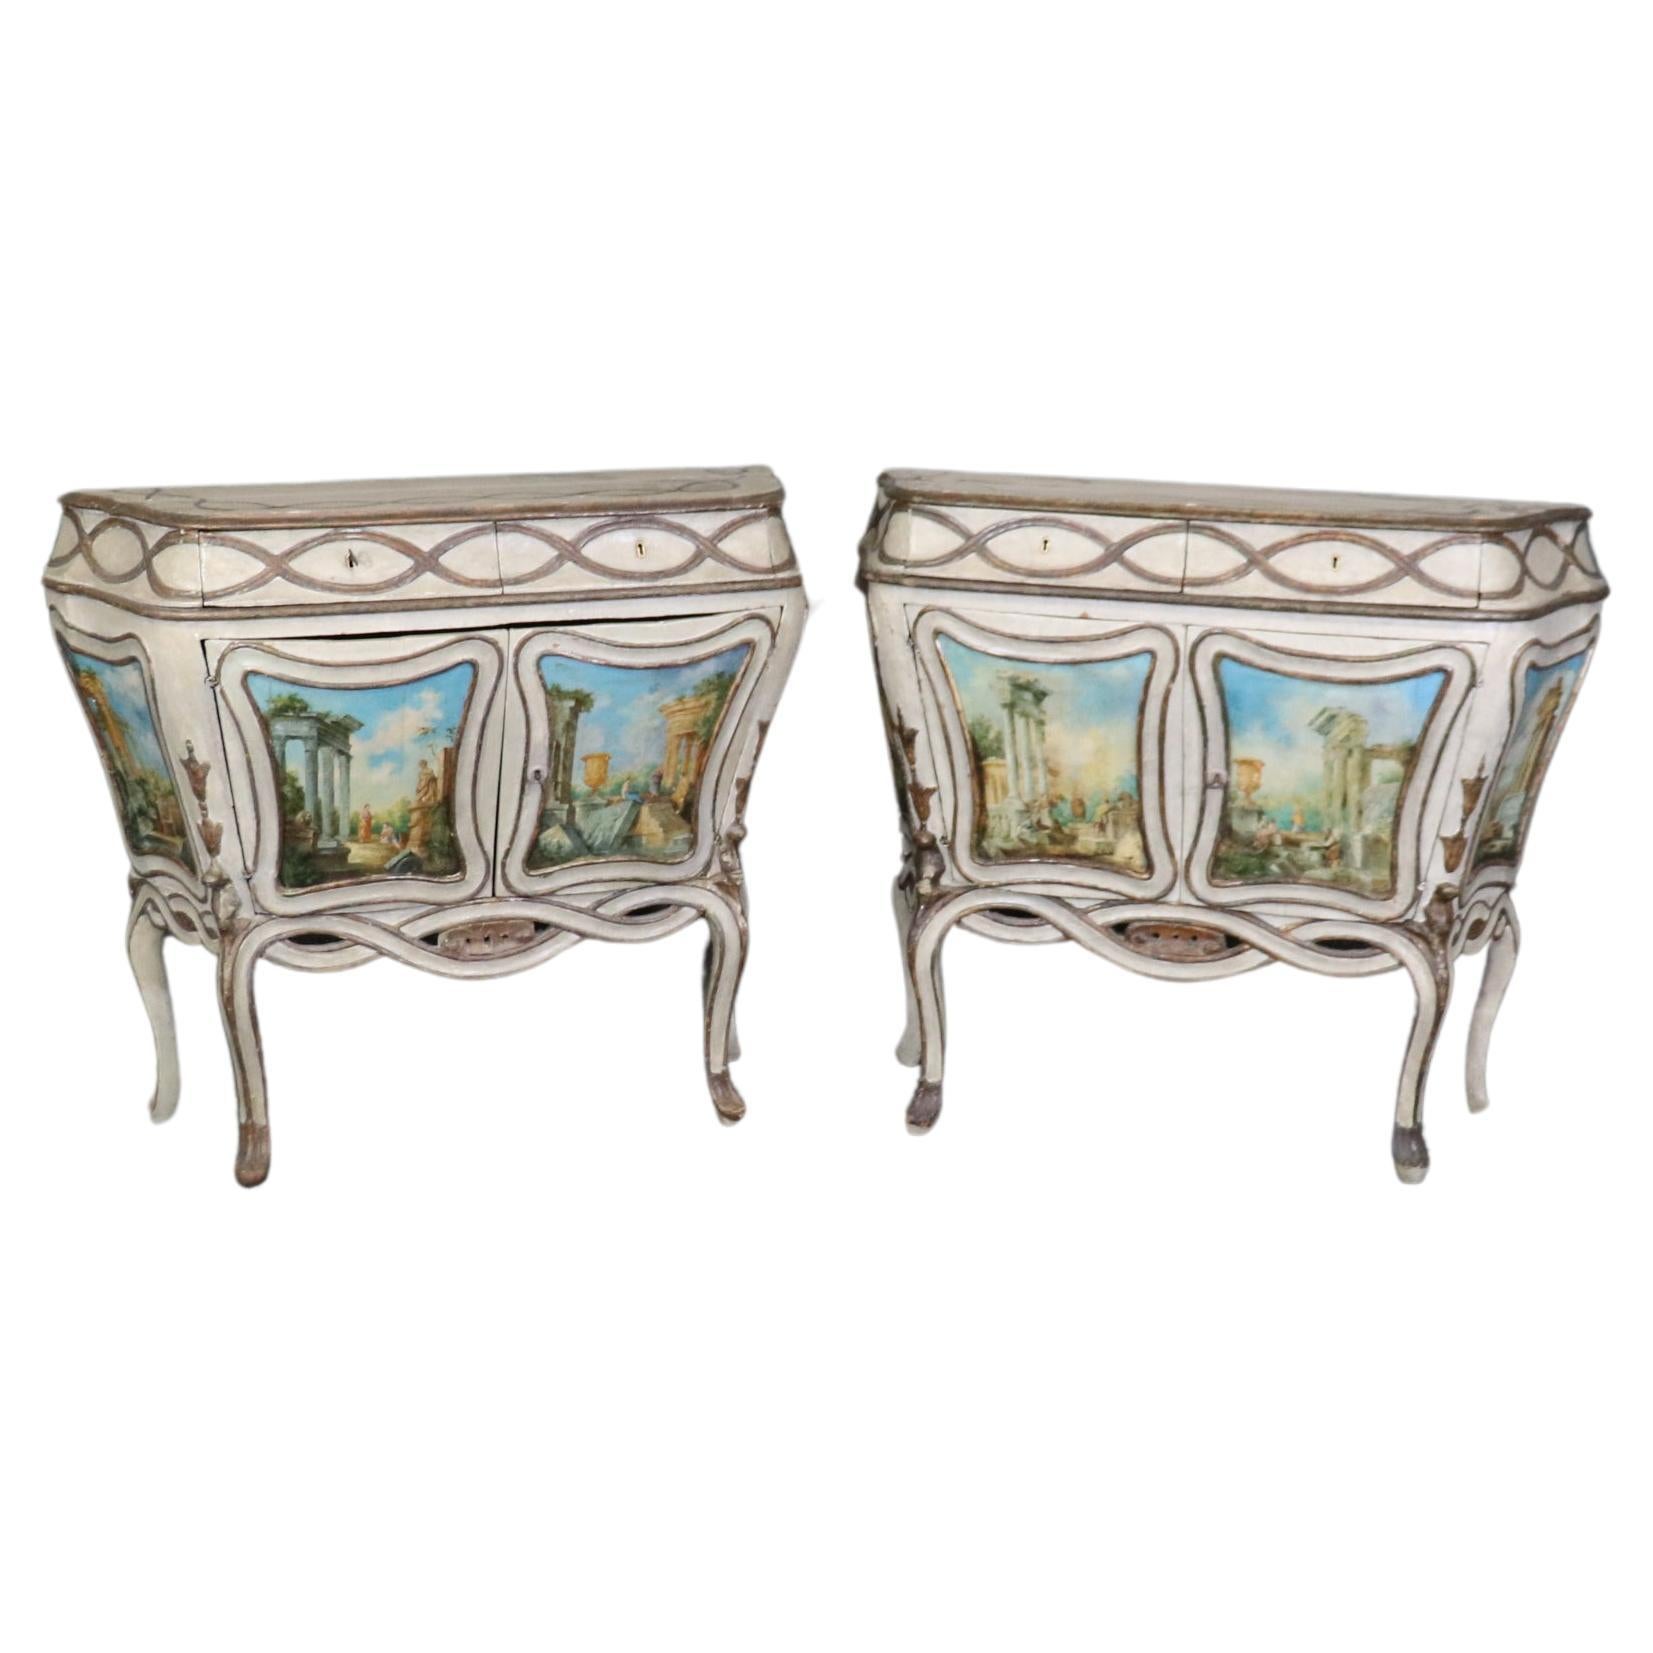 Rare Pair Period 18th Century Paint Decorated  Venetian Commodes Cabinets For Sale